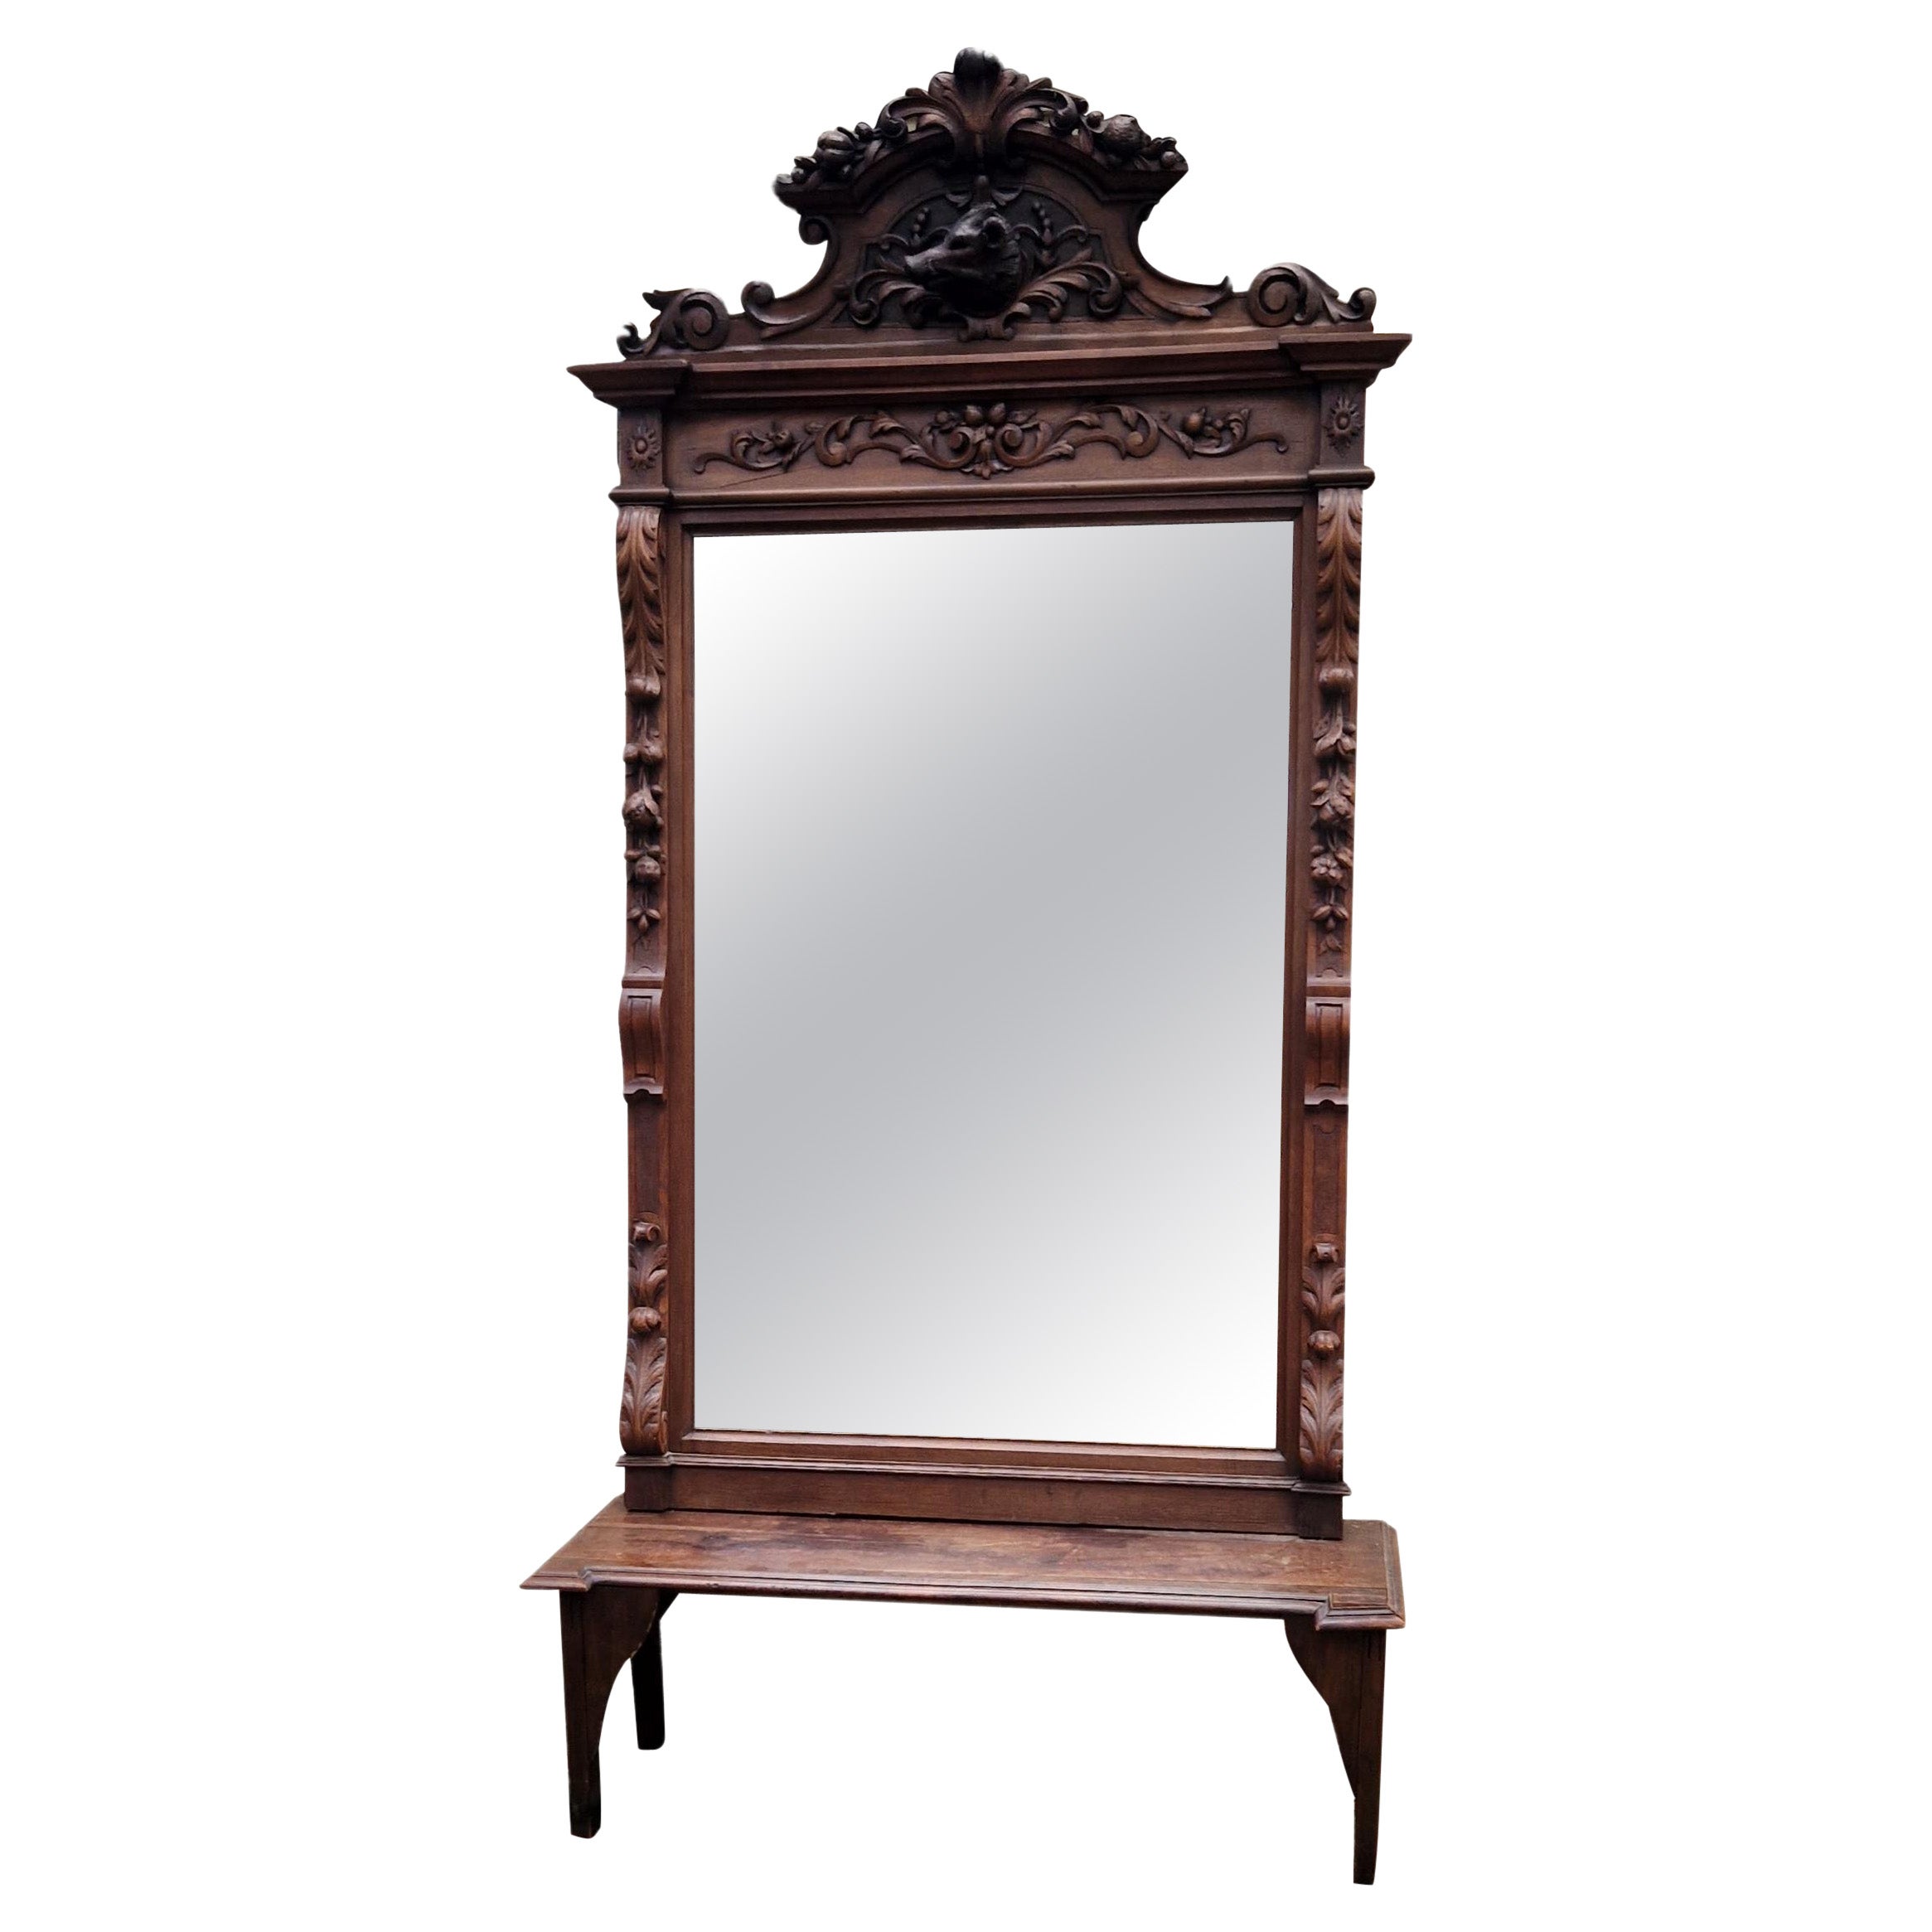 Absolutely Fantastic 19th Century Italian Mirror Heavily carved in Walnut


Hand Carved Surround

Boar Central Crest

Carvings of Flowers, Berries & Foliage

Small Console Table Stand

Waxed Walnut

Original Back panel missing

19th Century

Sourced